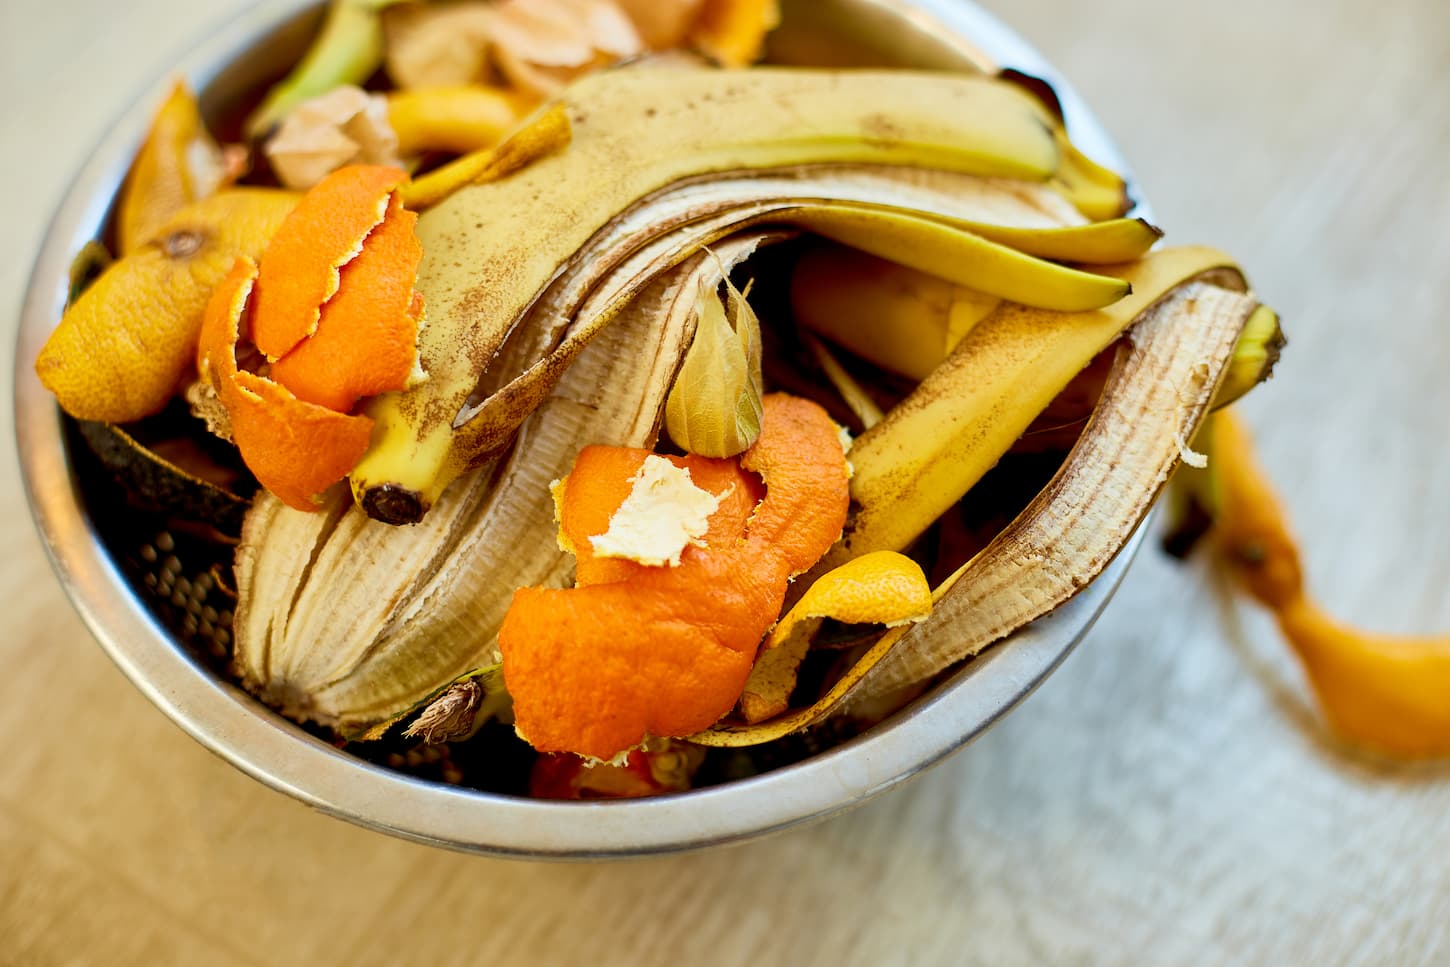 An image of banana peel and orange peel leftover in a bowl as organic compost.